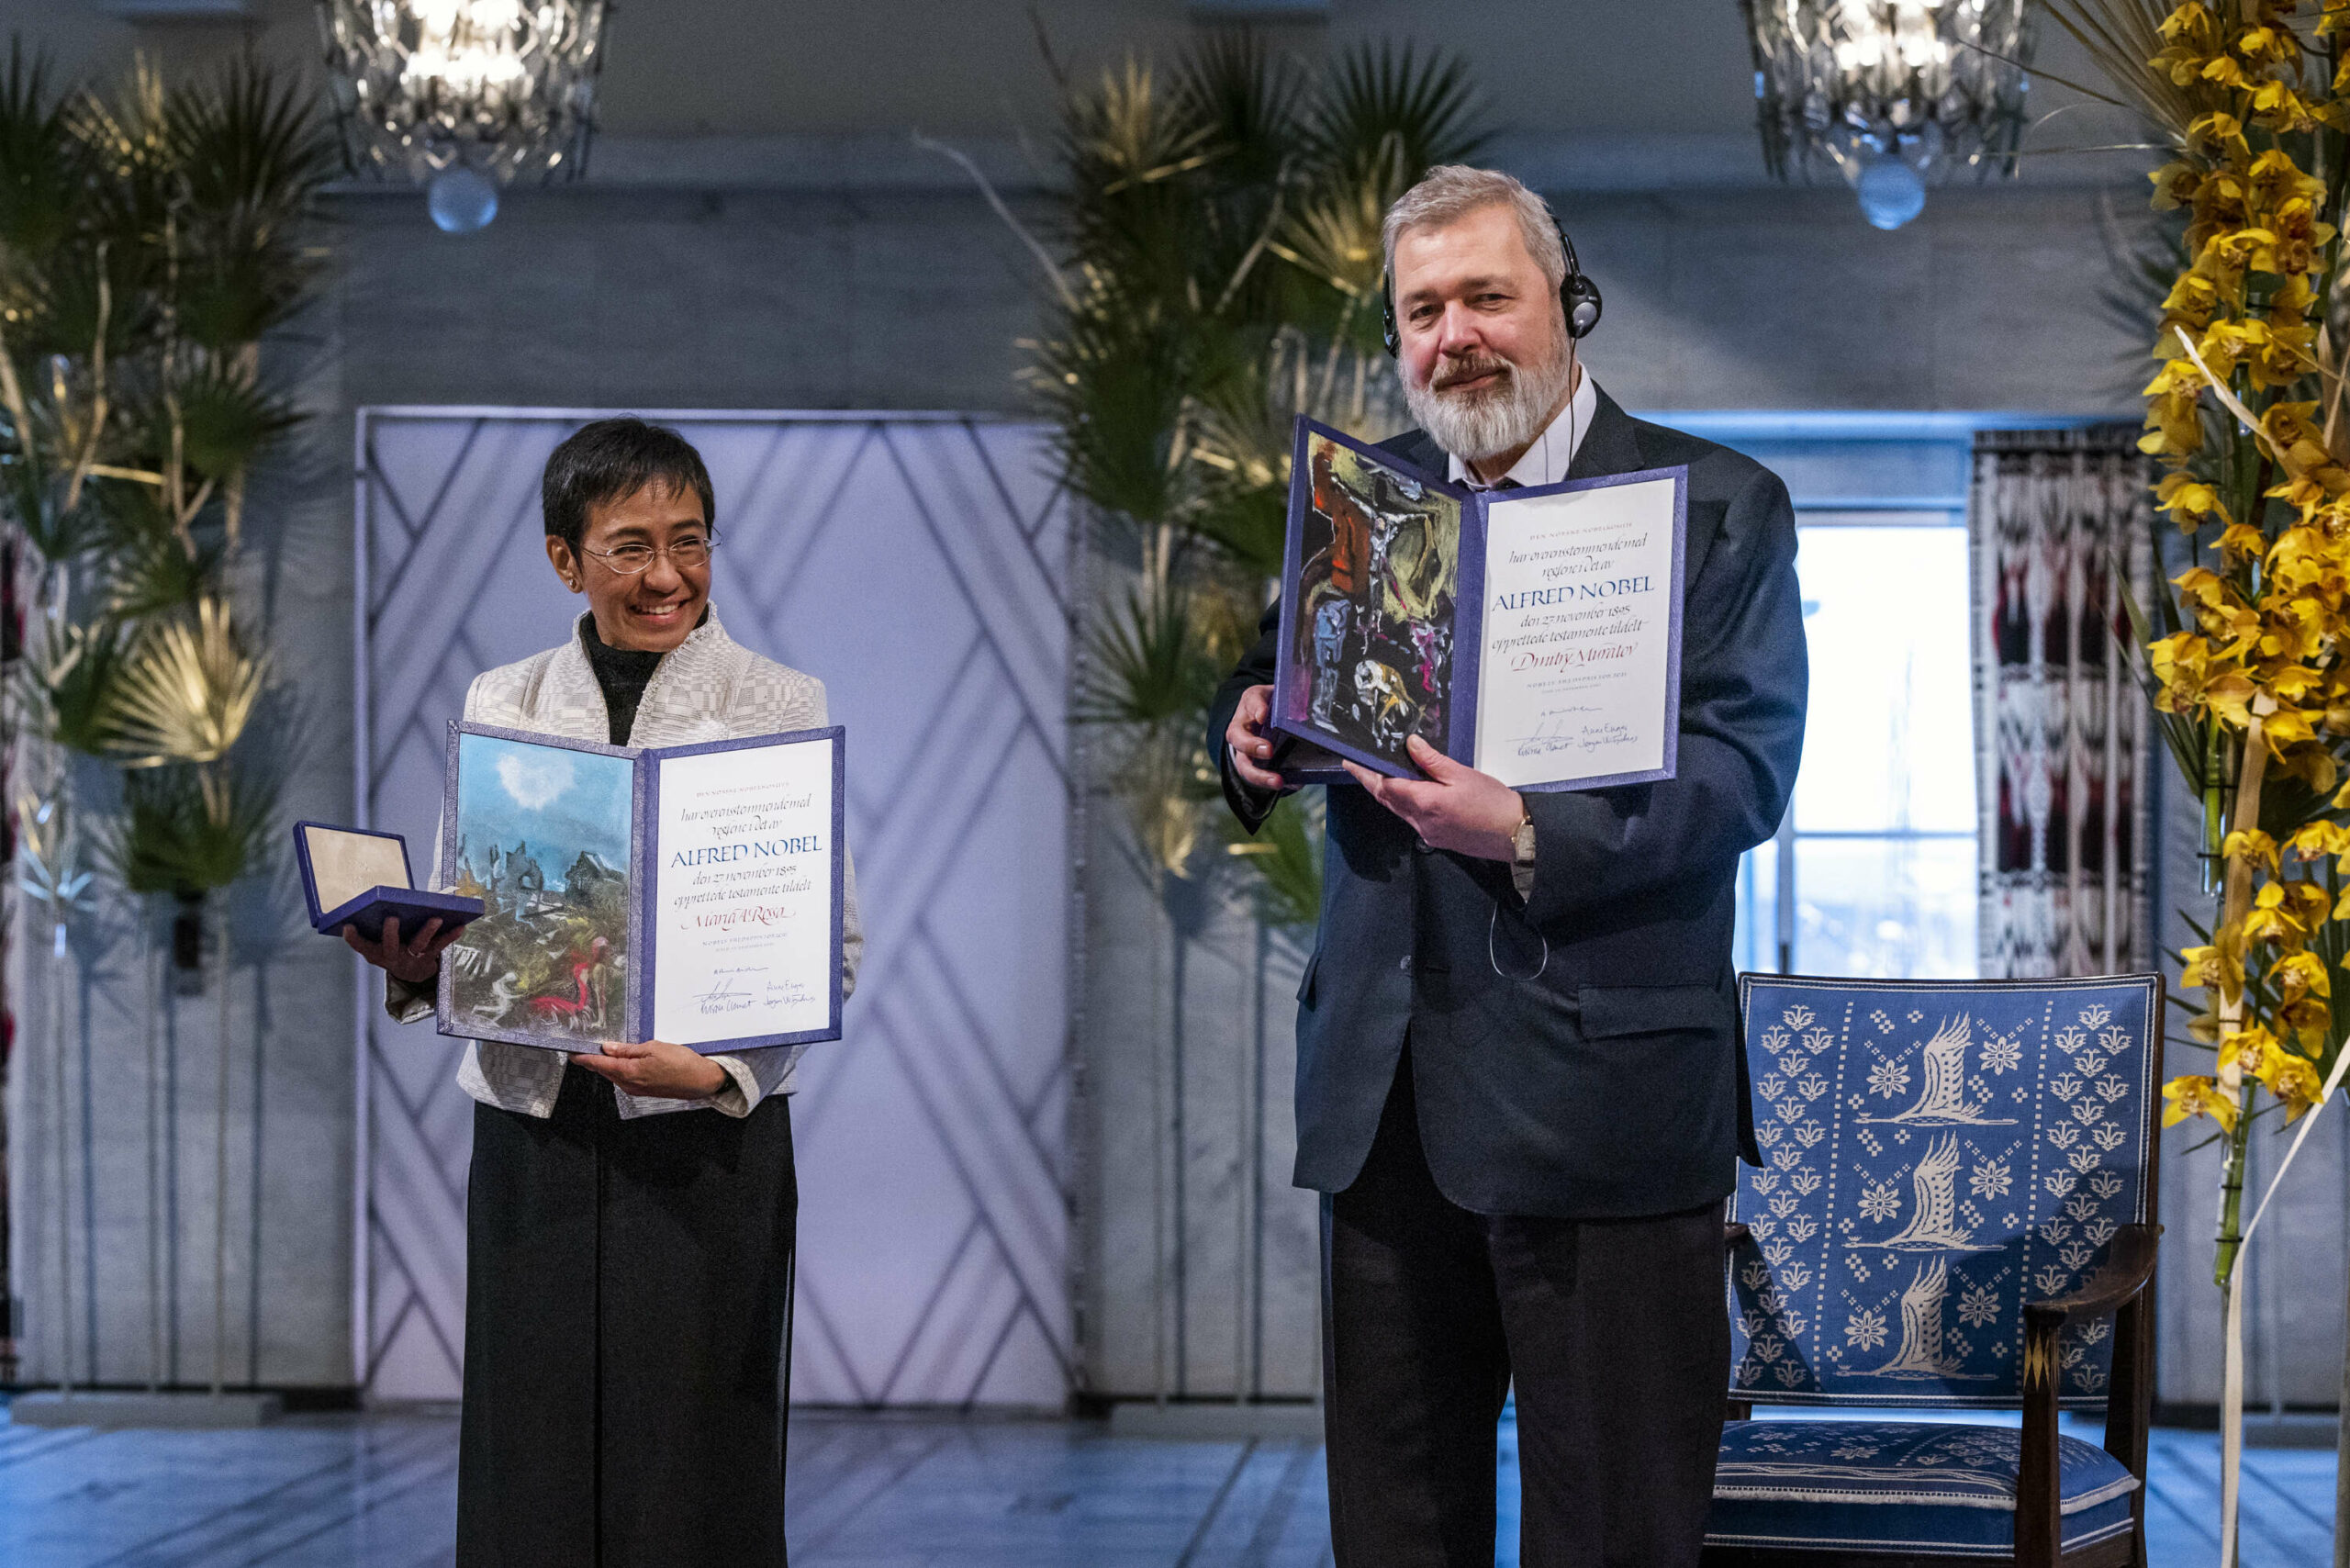 Ressa hits at impunity, big tech in historic Nobel Peace Prize acceptance speech